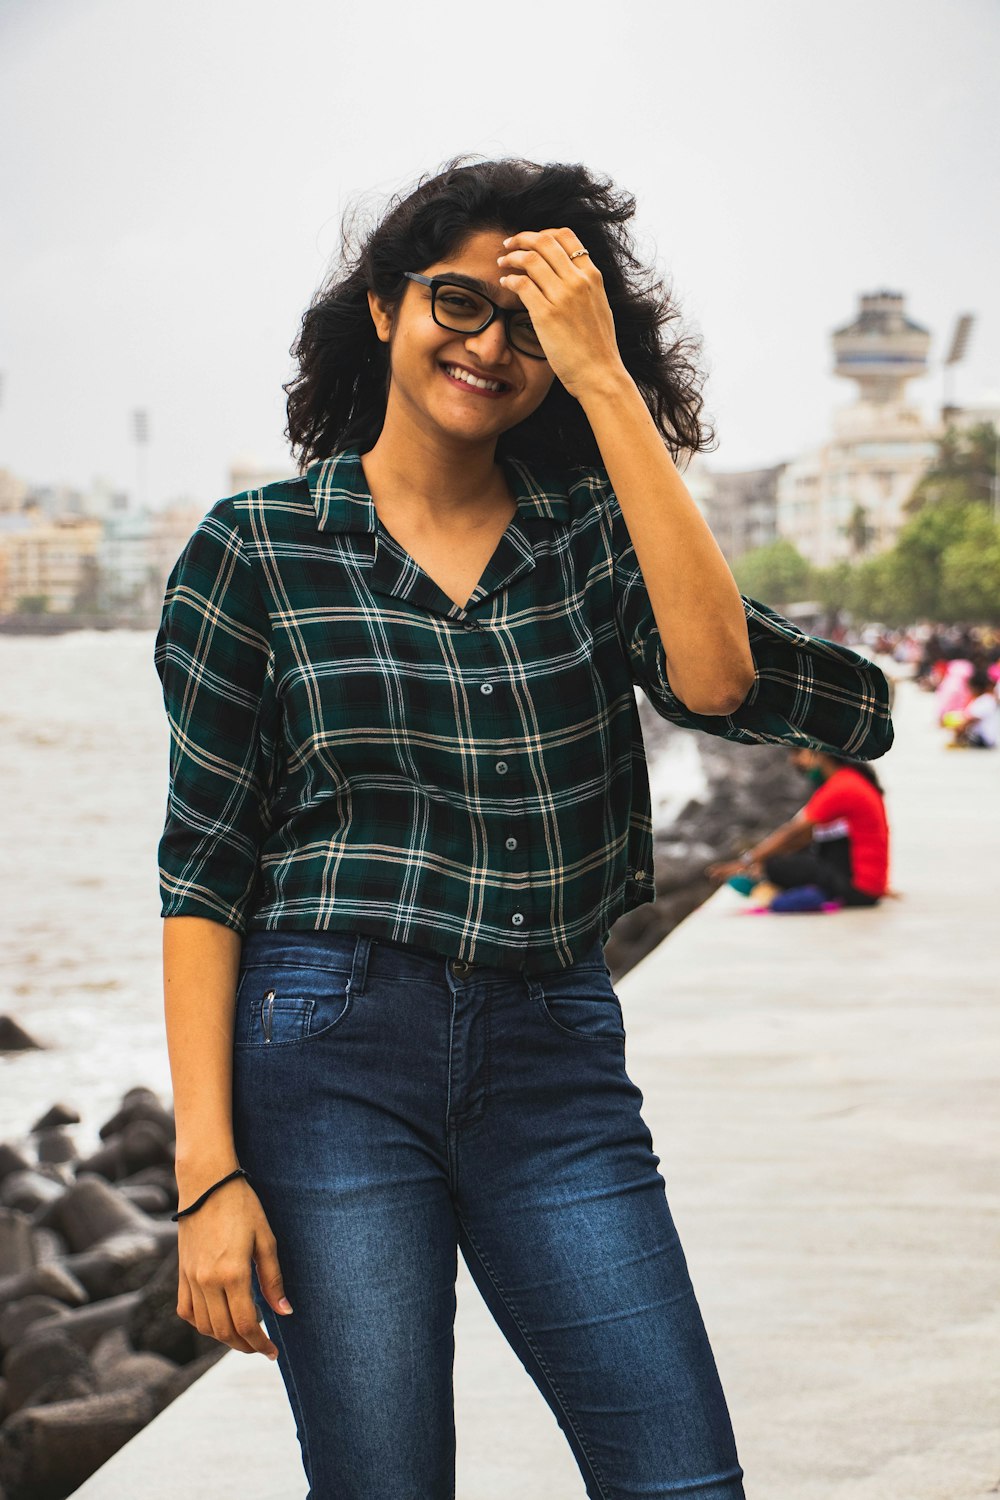 woman in black and white checkered button up shirt and blue denim jeans standing on beach